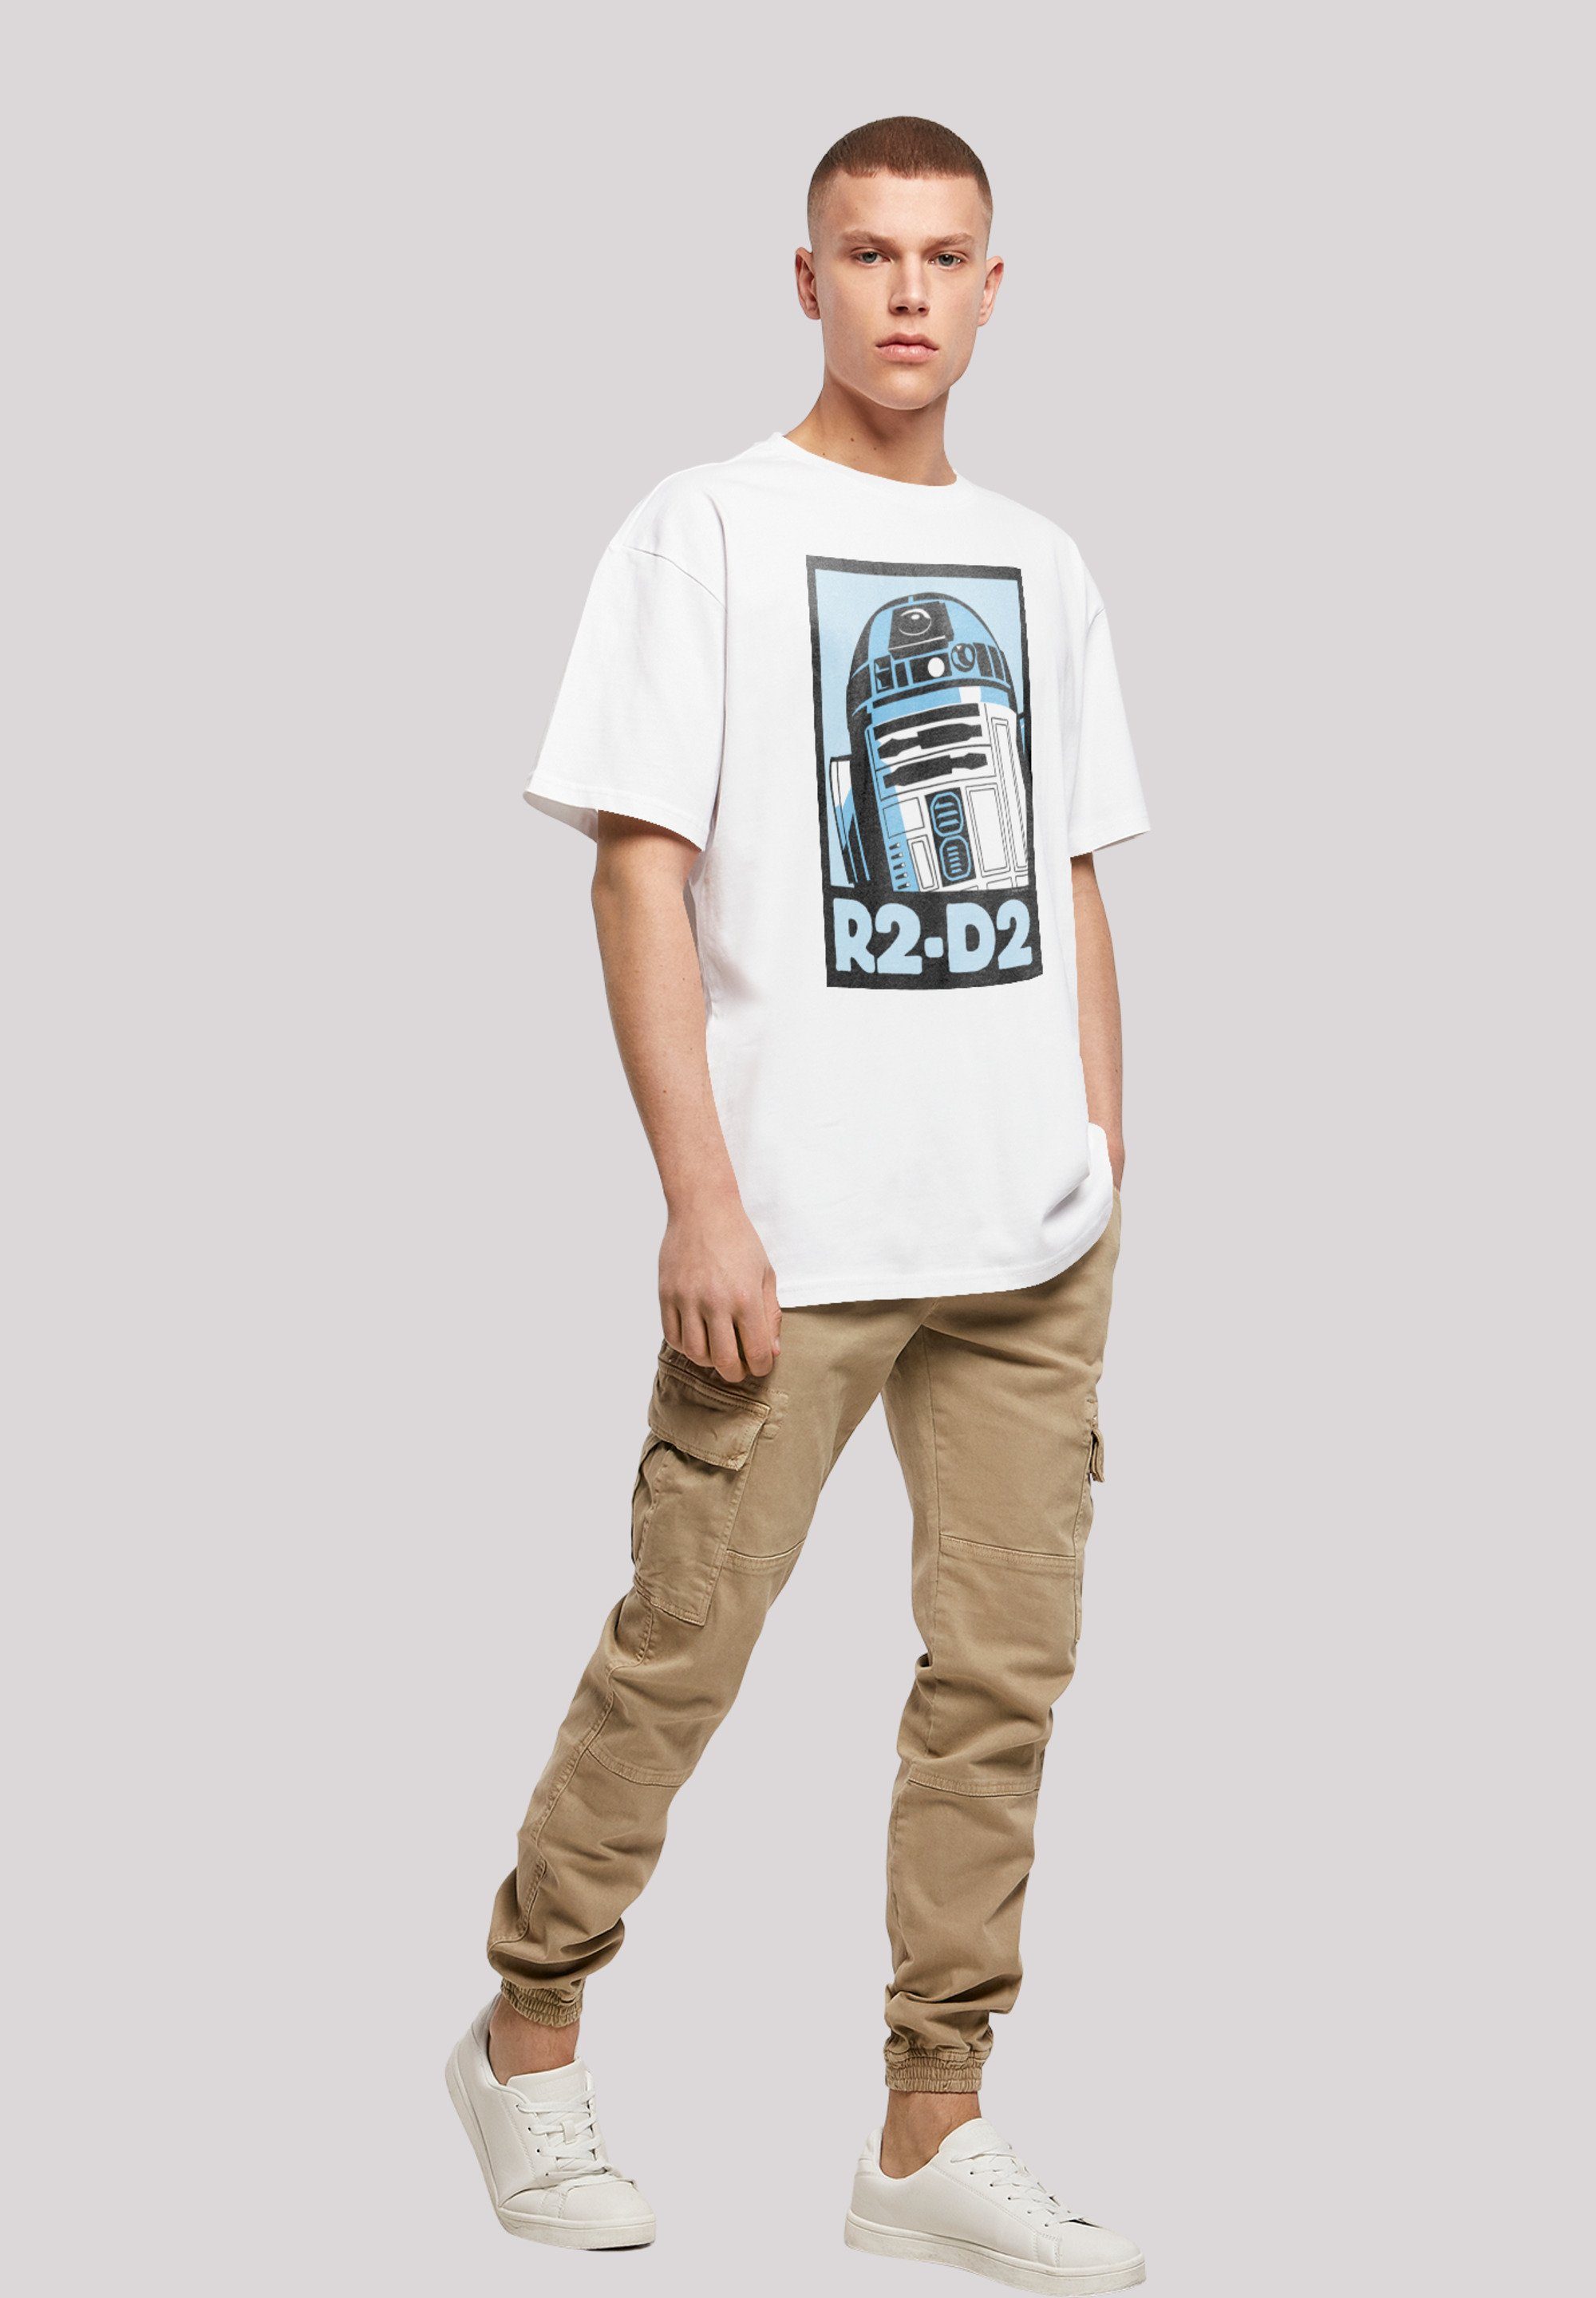 Kurzarmshirt with Heavy Herren F4NT4STIC white Oversize Tee Poster Wars (1-tlg) Star R2-D2